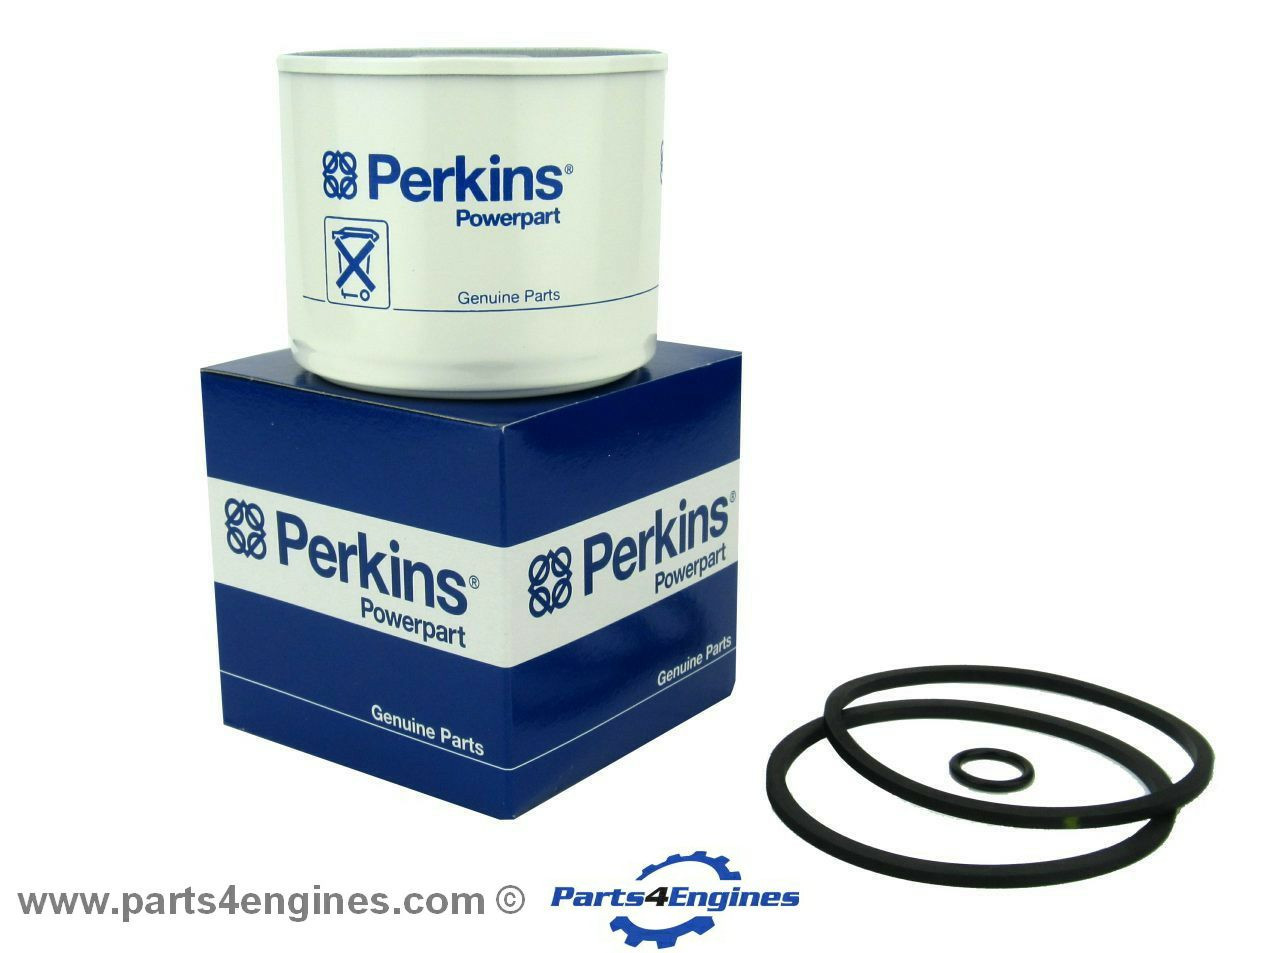 Perkins 415GM fuel filter from Parts4engines.com